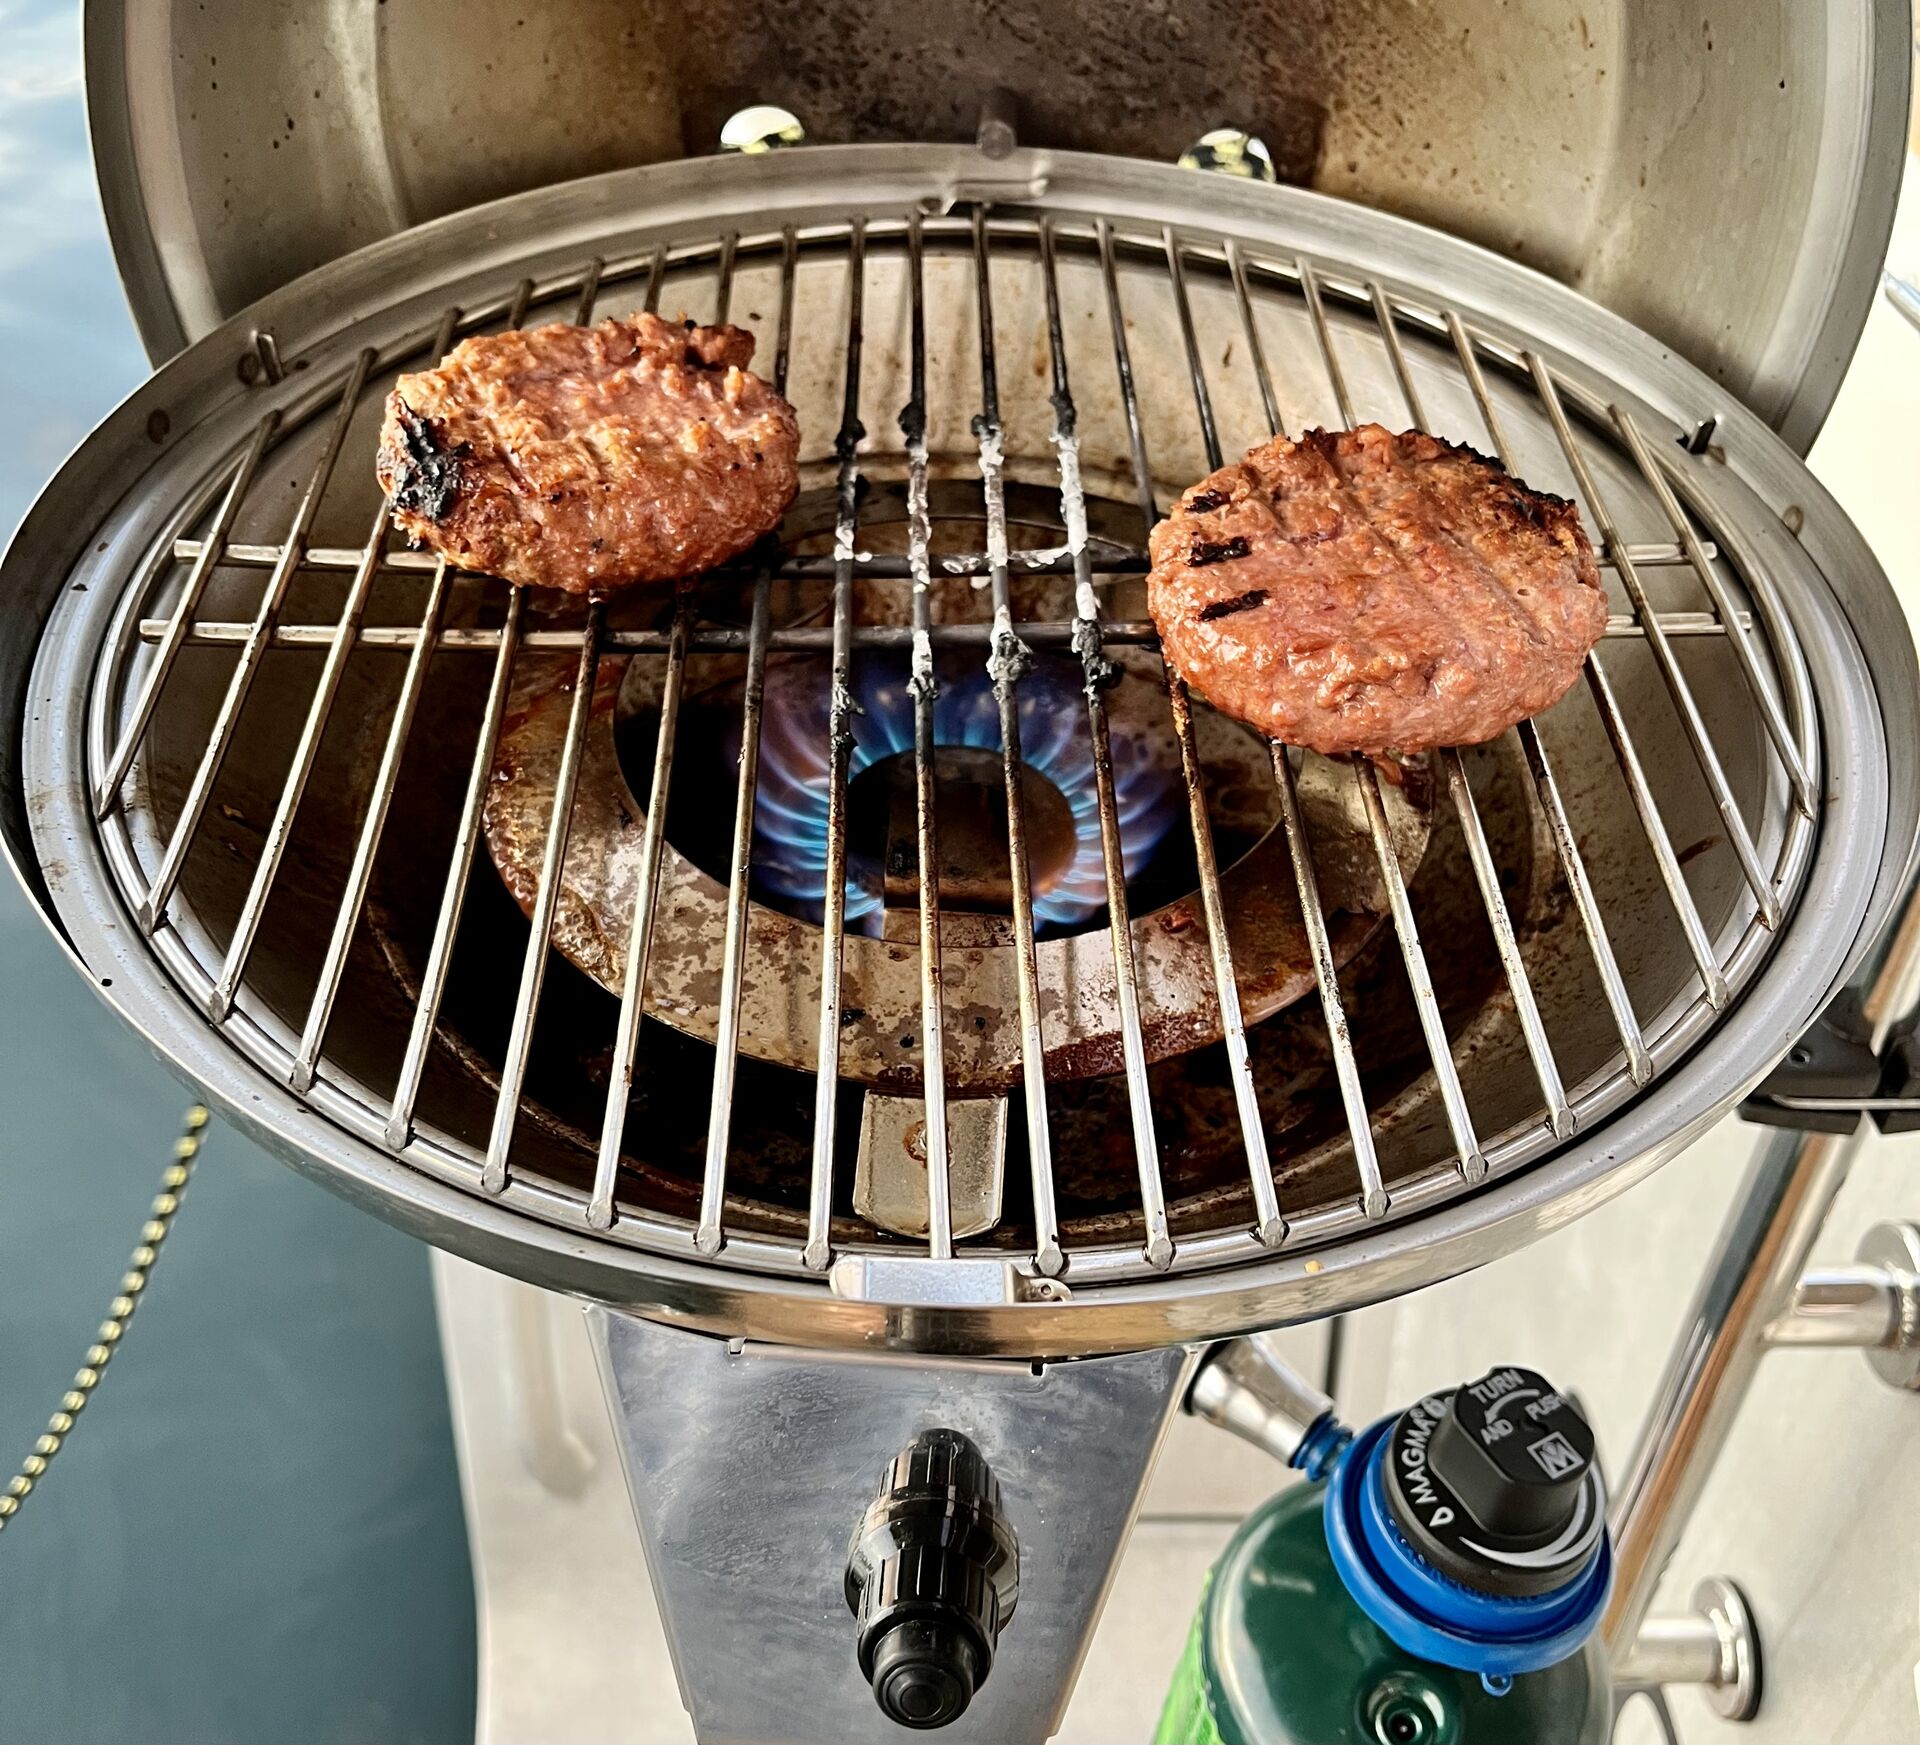 Putting the grill to the test.